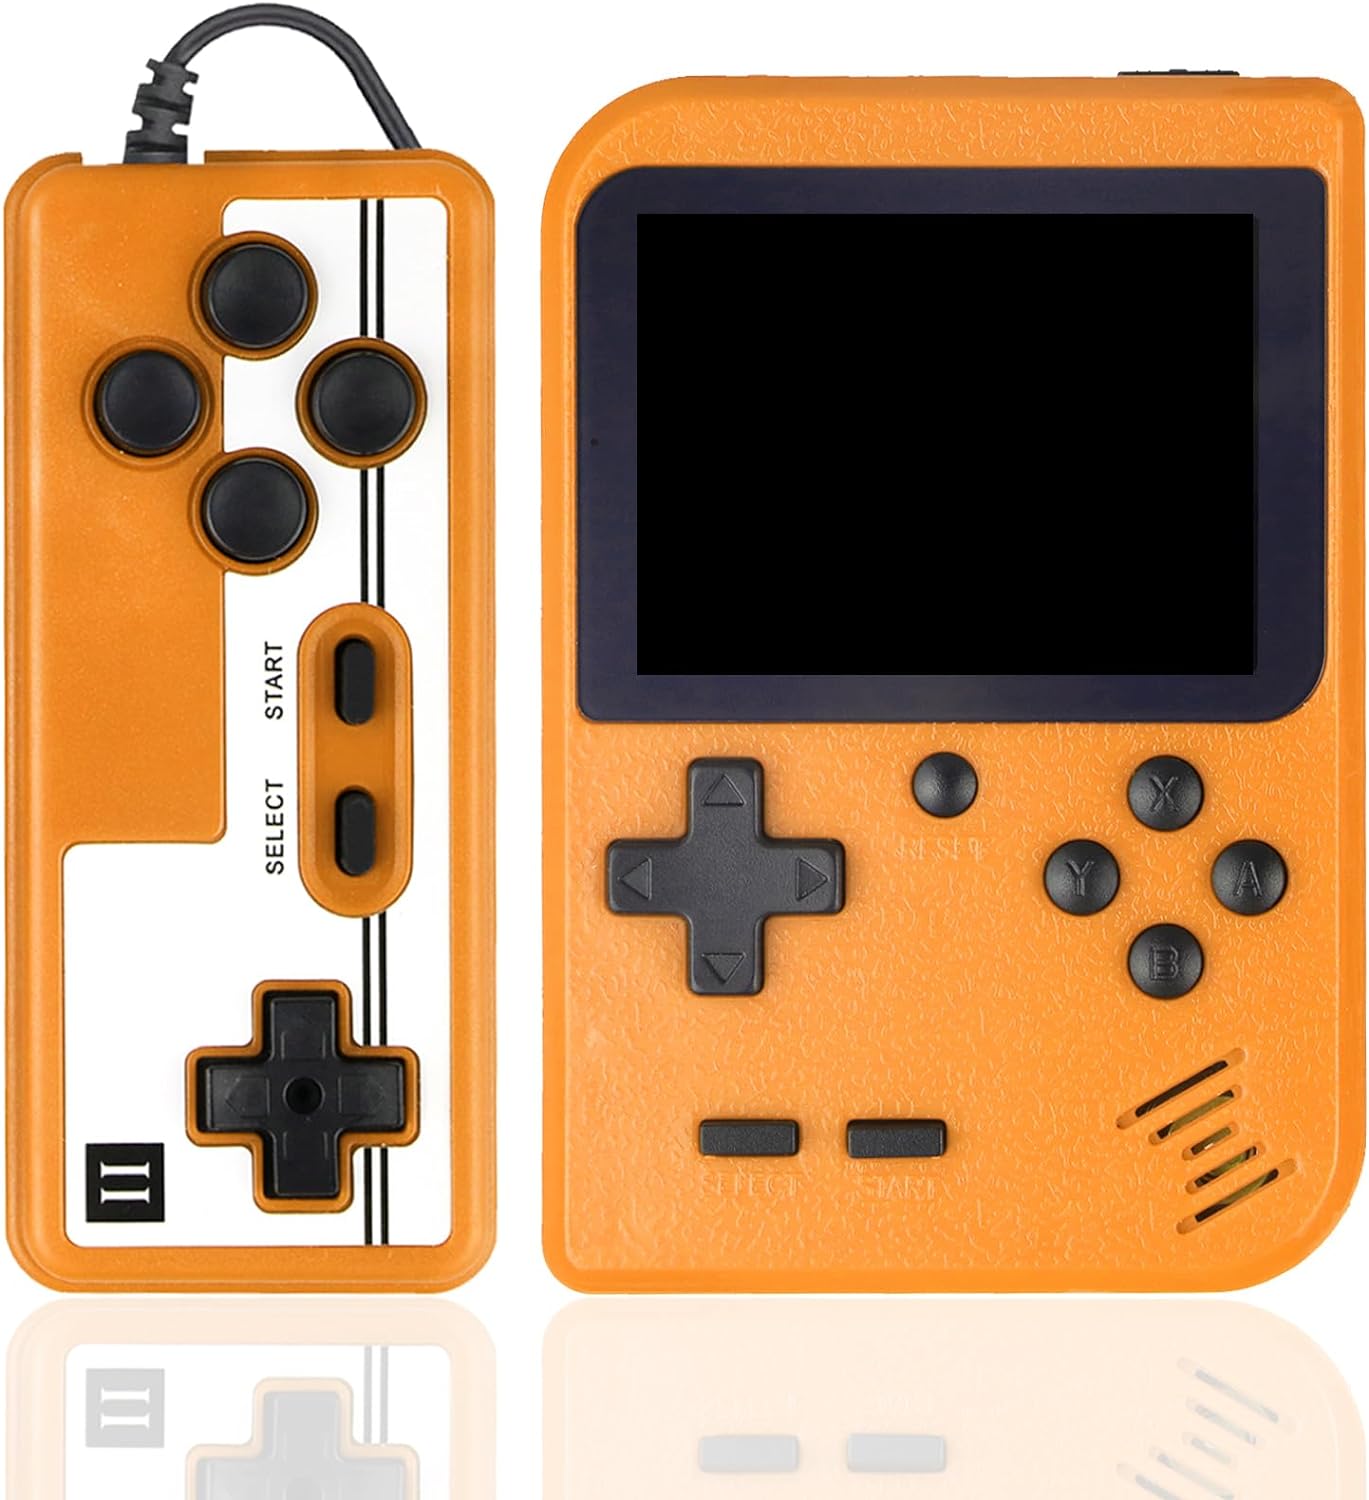 Hikonia Handheld Game Console,Portable Retro Video Game Console with 500 Classical Games,3.0 Inches Screen,1020mAh Rechargeable Battery,Support for TV & Two Players,Gift for Kids & Adult(Orange)